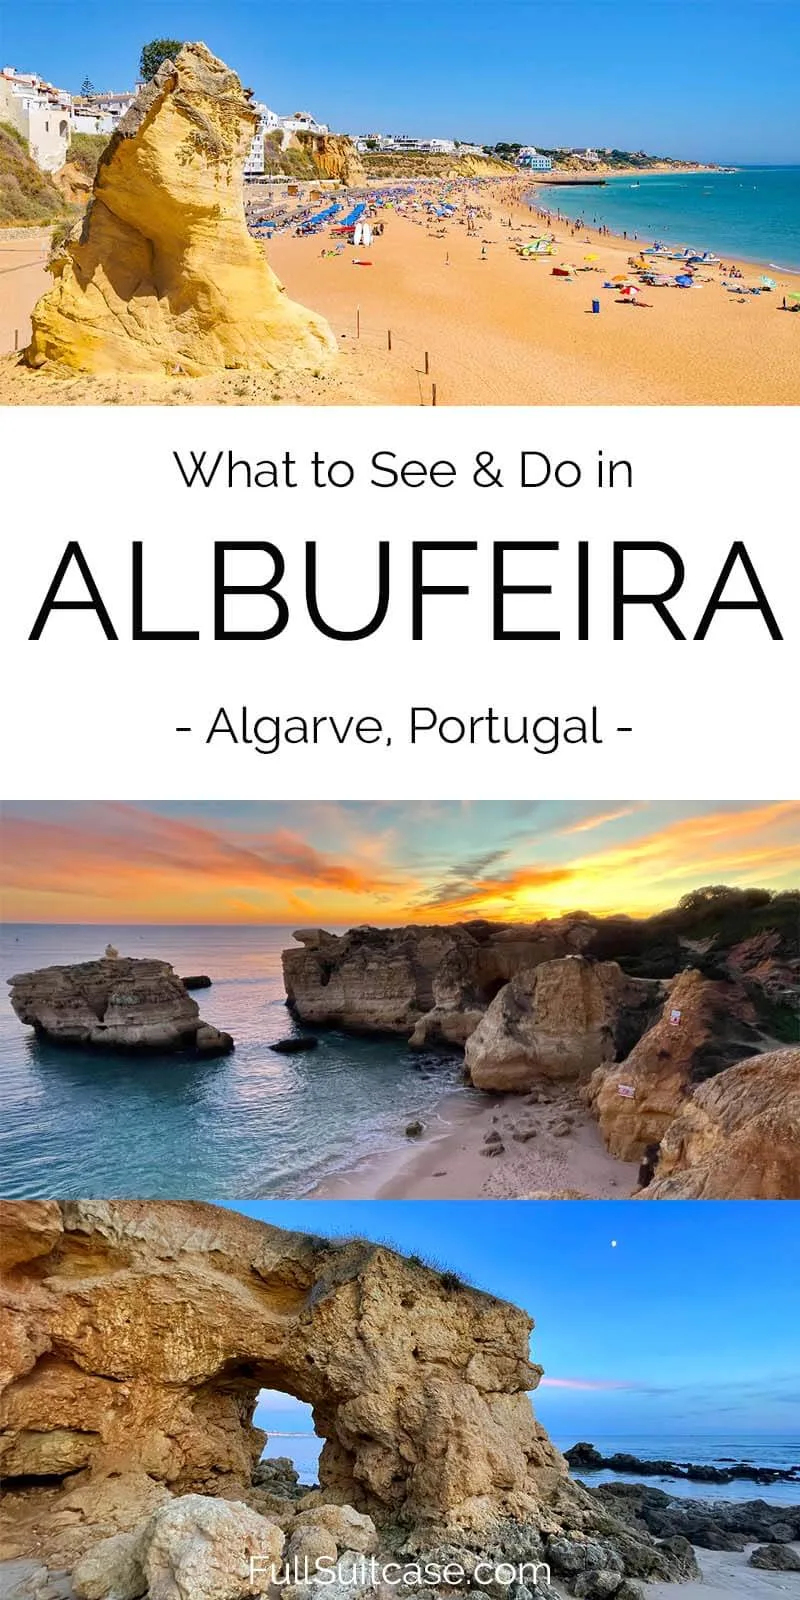 Top places to visit and things to do in Albufeira (Algarve, Portugal)